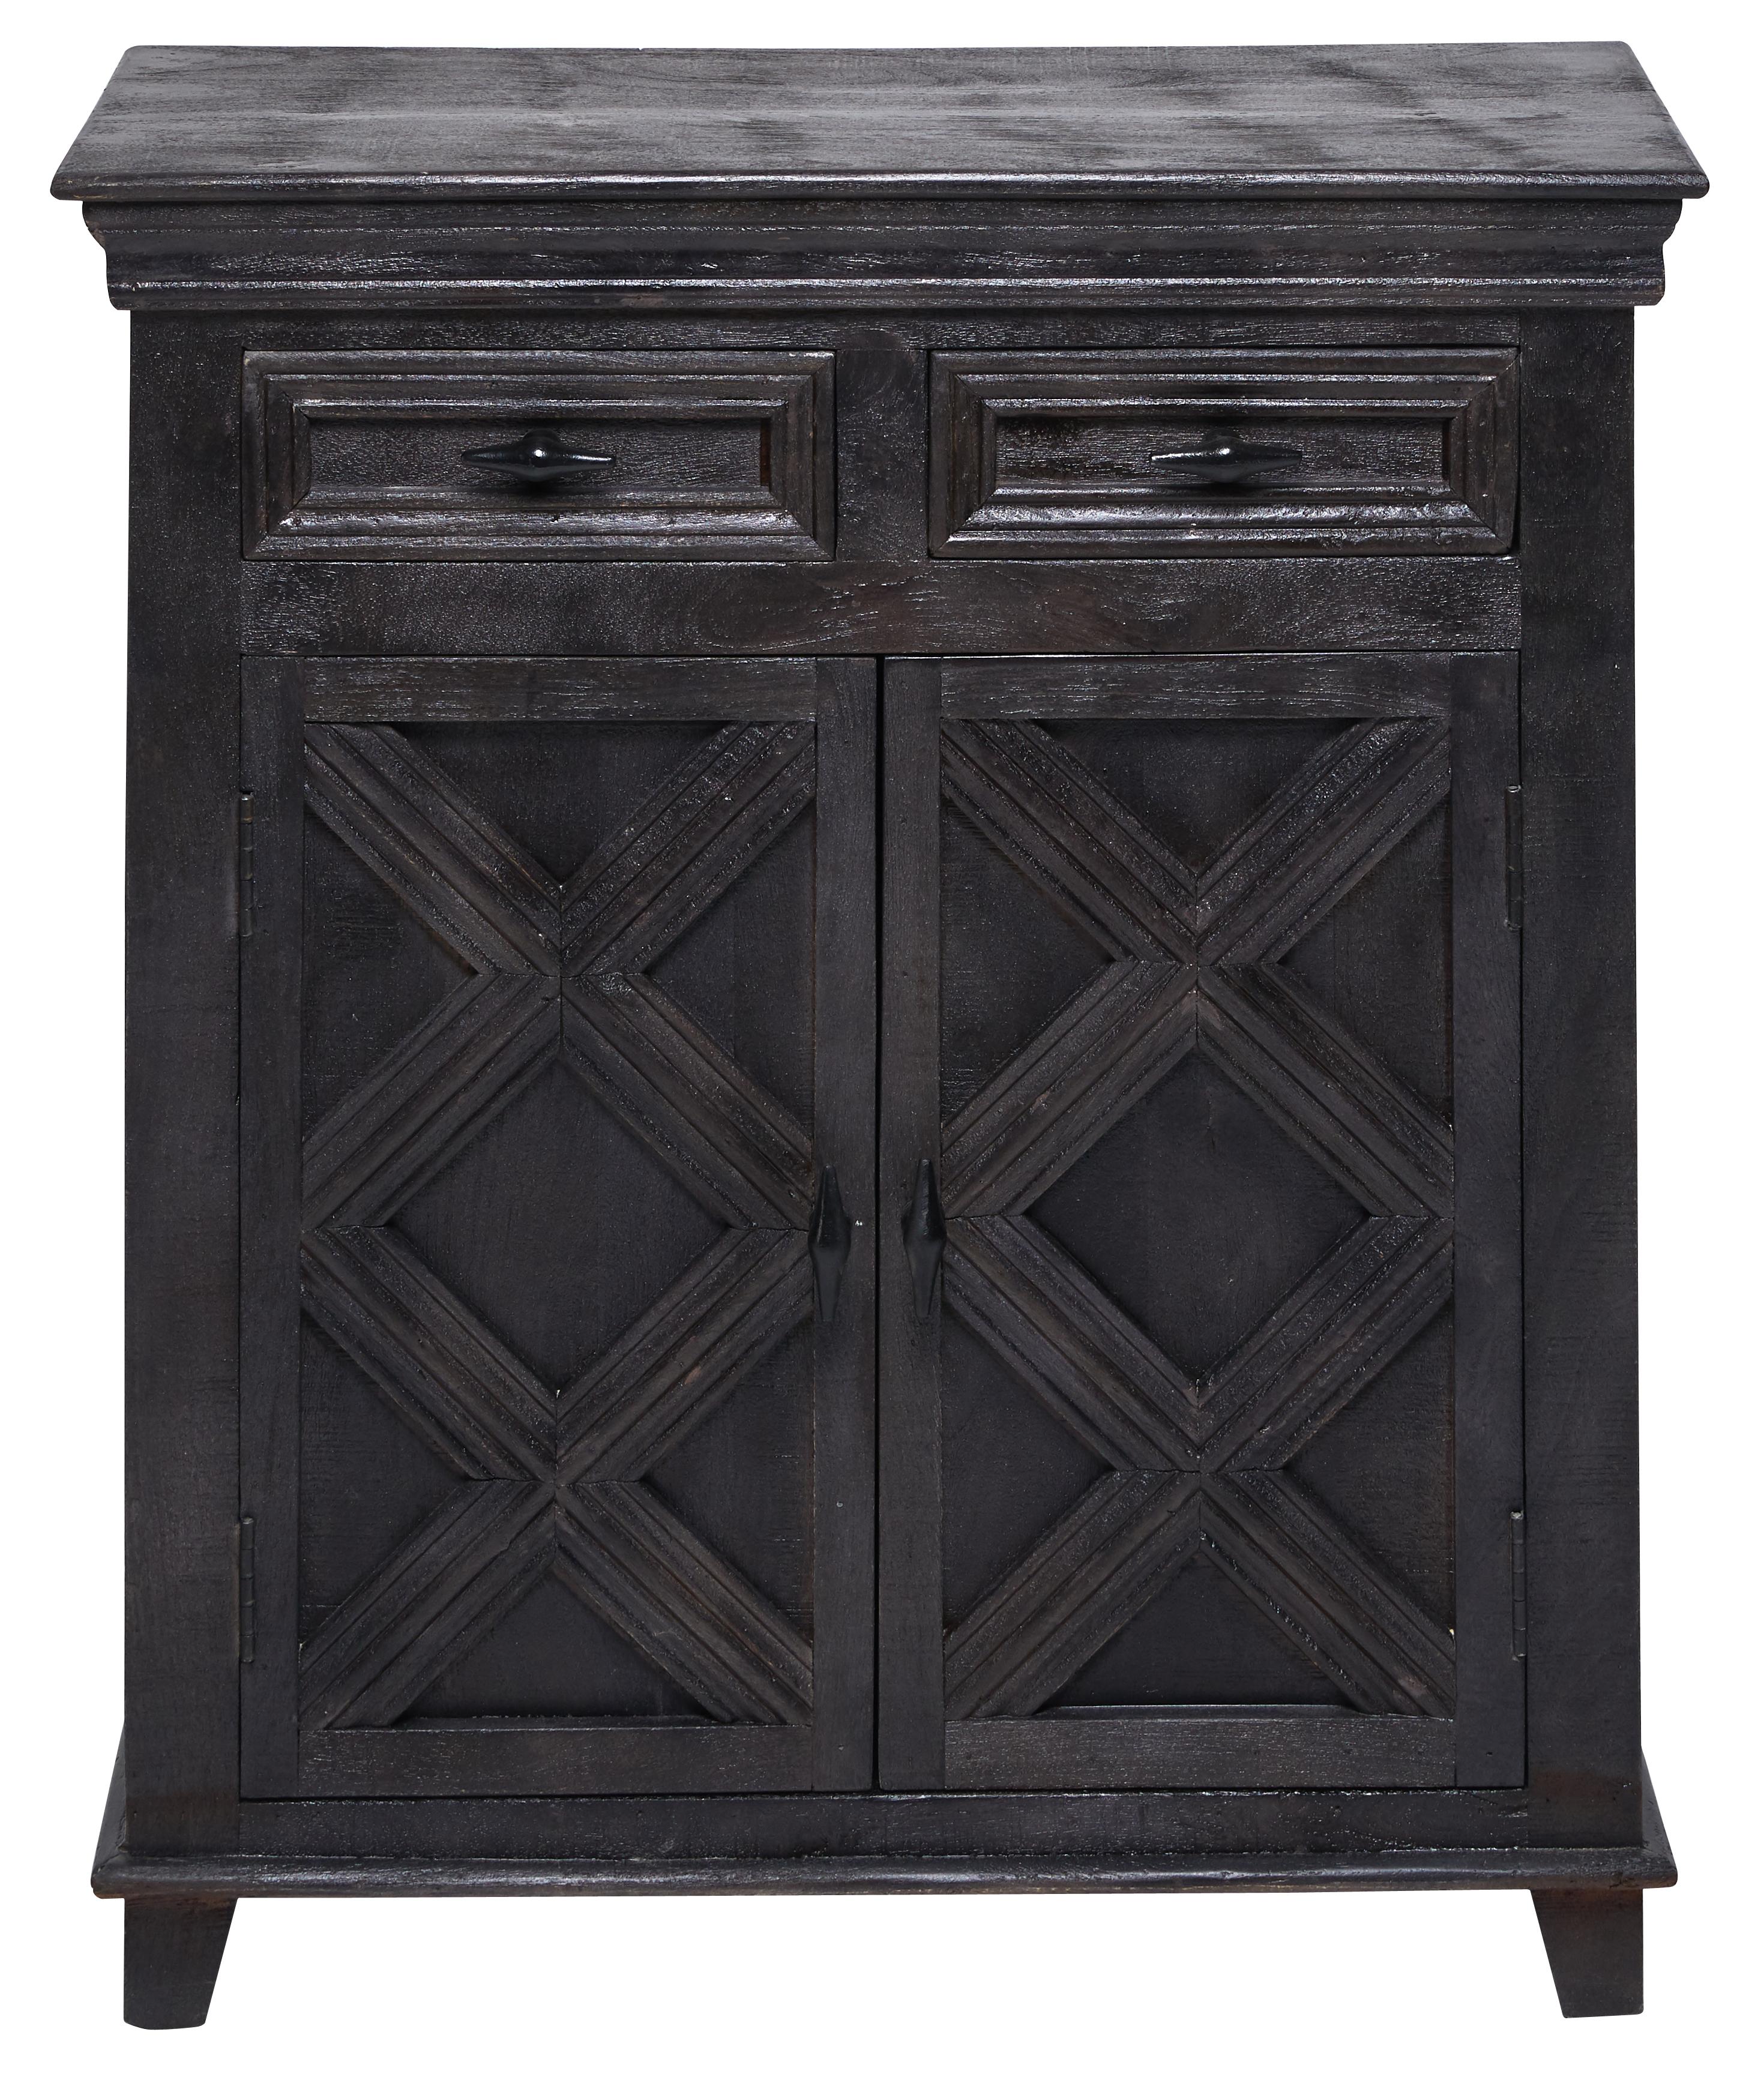 Transitional Cabinet EIP-11036 Alderfer EIP-11036 in Onyx 